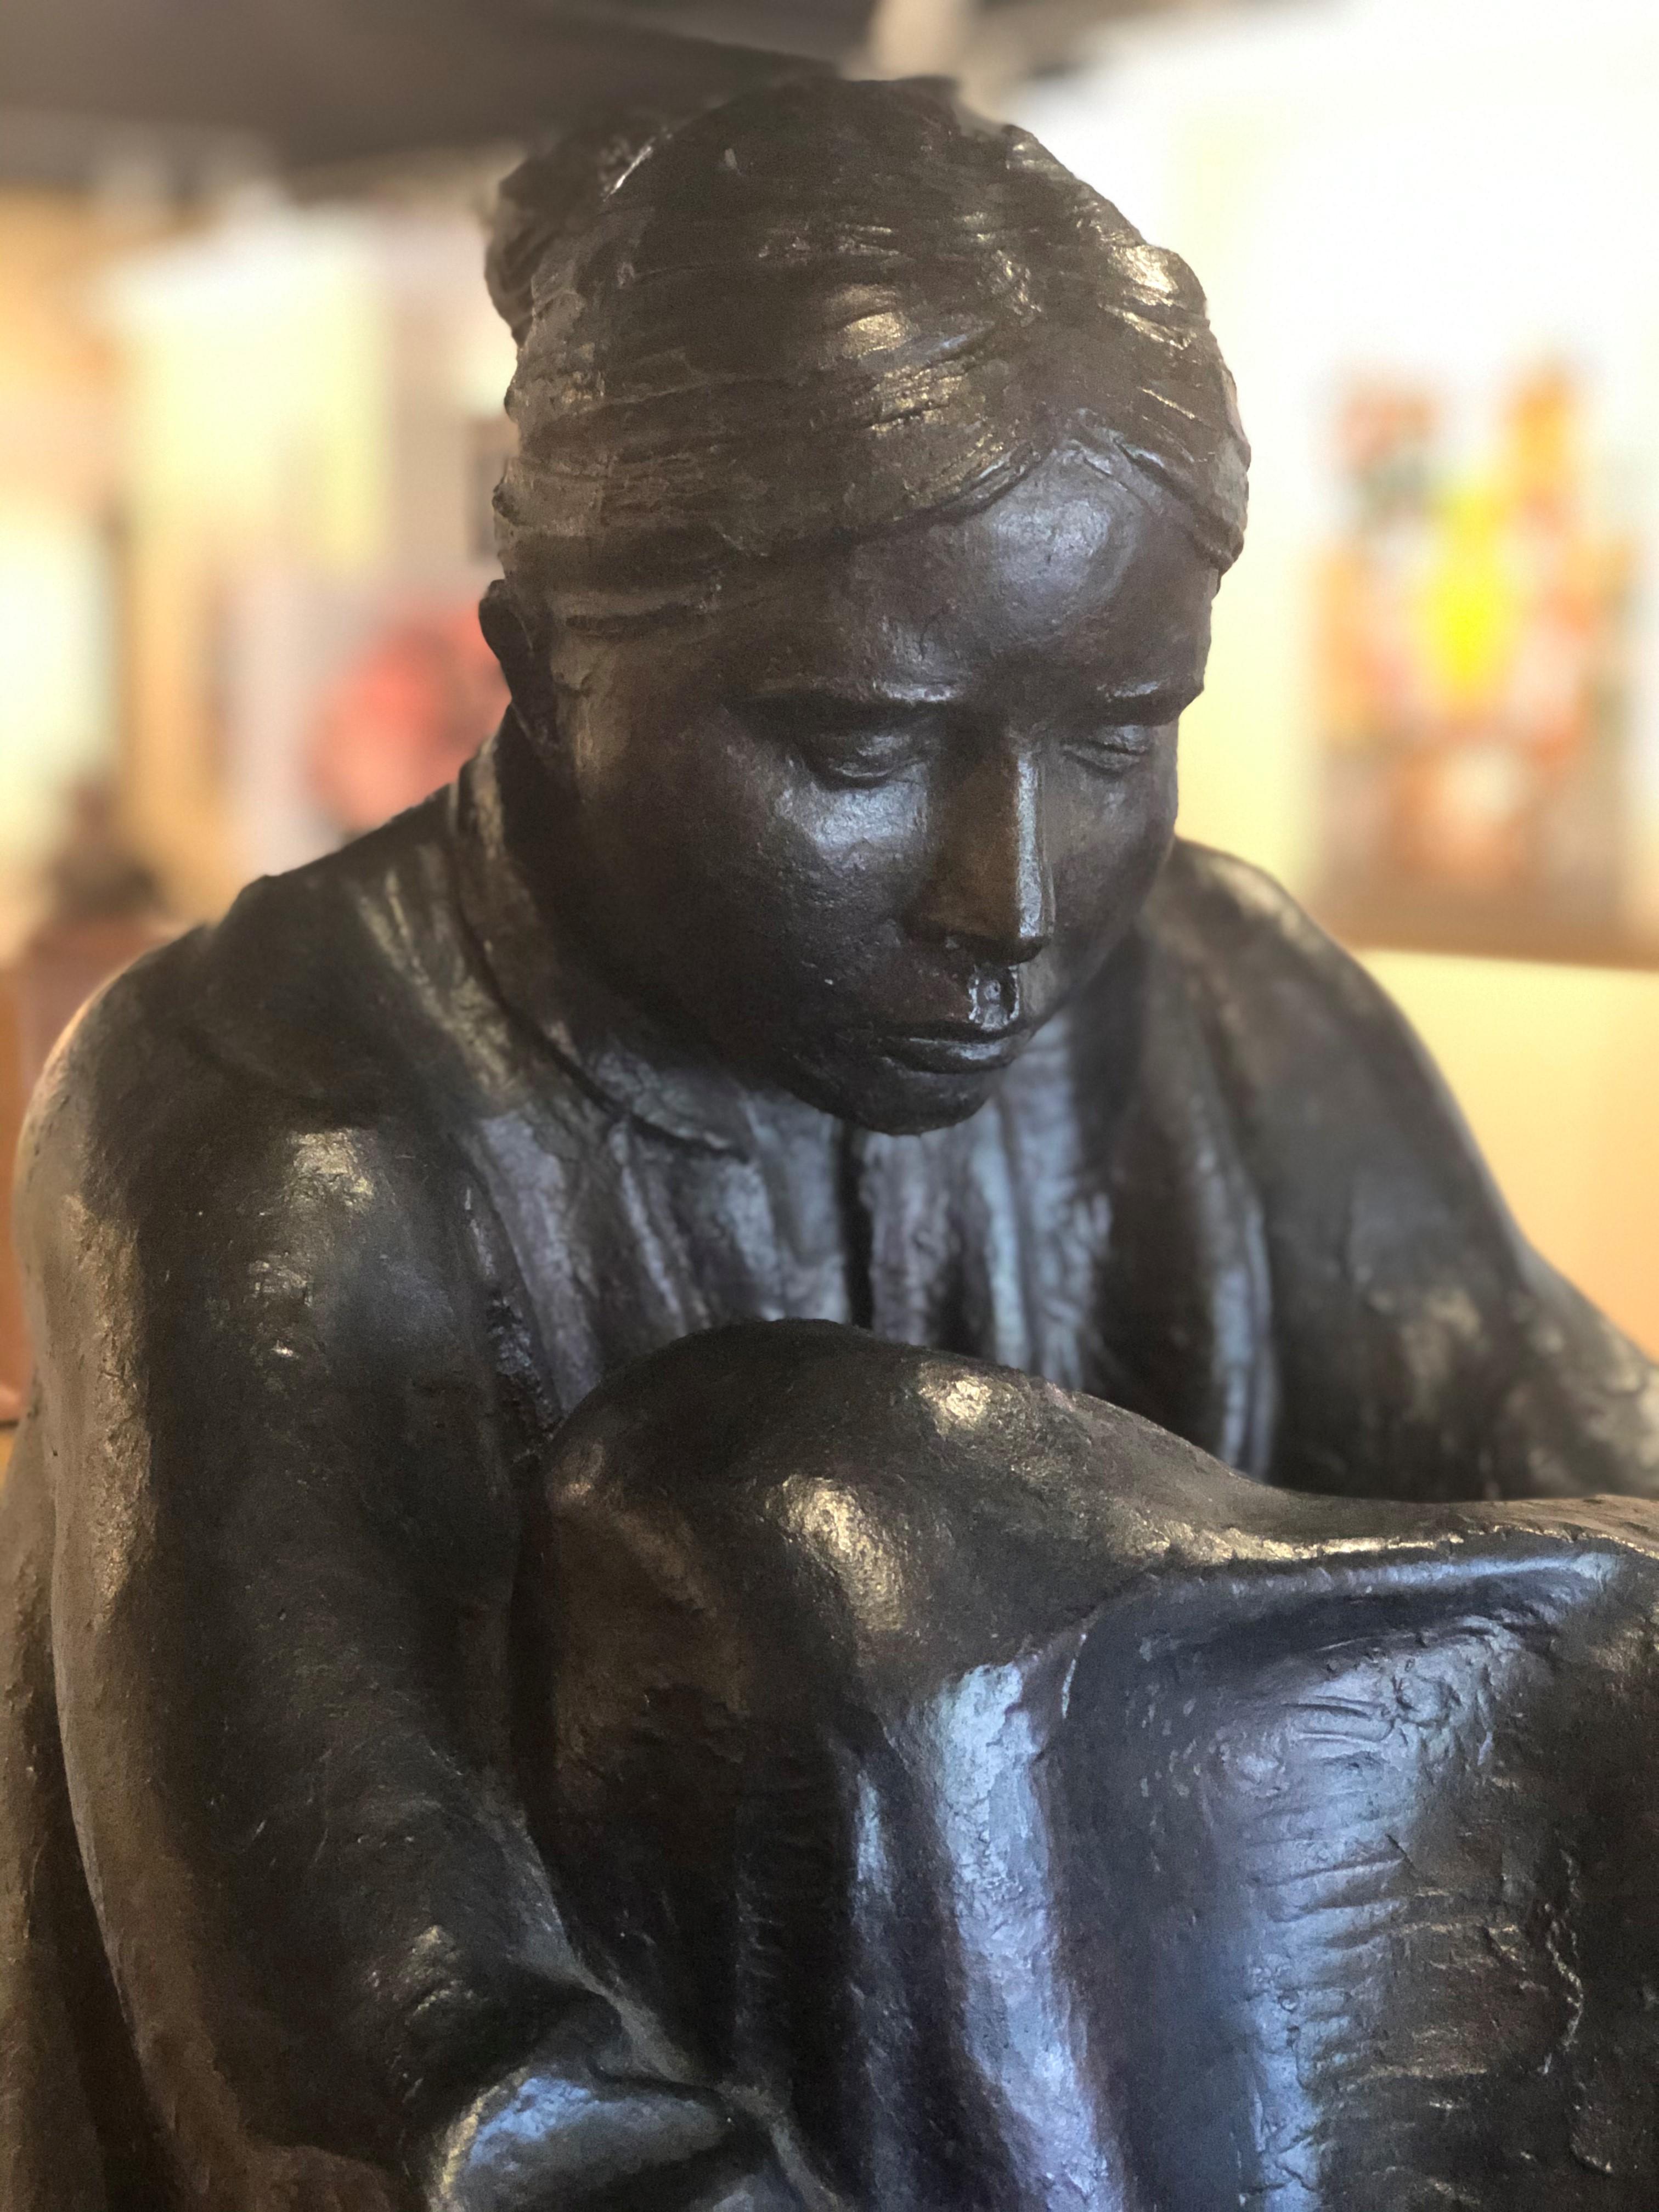 Item is in excellent condition and has only been displayed in a gallery setting. 

Felipe Castaneda is an internationally renowned sculptor known for his enormous talent. He was born on December 16, 1933 in Michoacan, Mexico, and in 1958 decided to